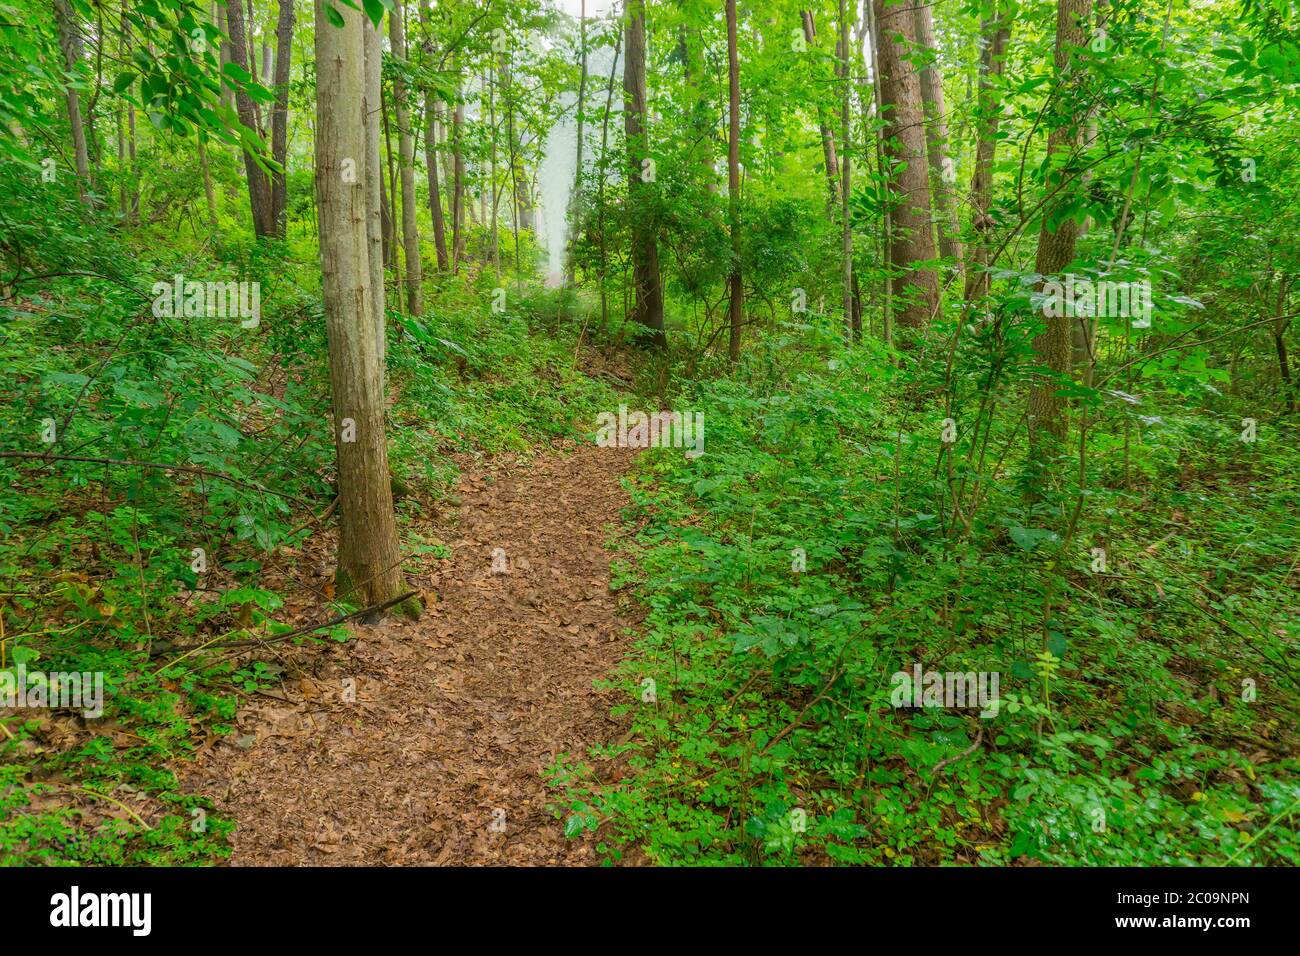 A foggy path leads through a forest in Michigan, USA. The deep forest leads to a lit opening at the end of the path. Stock Photo